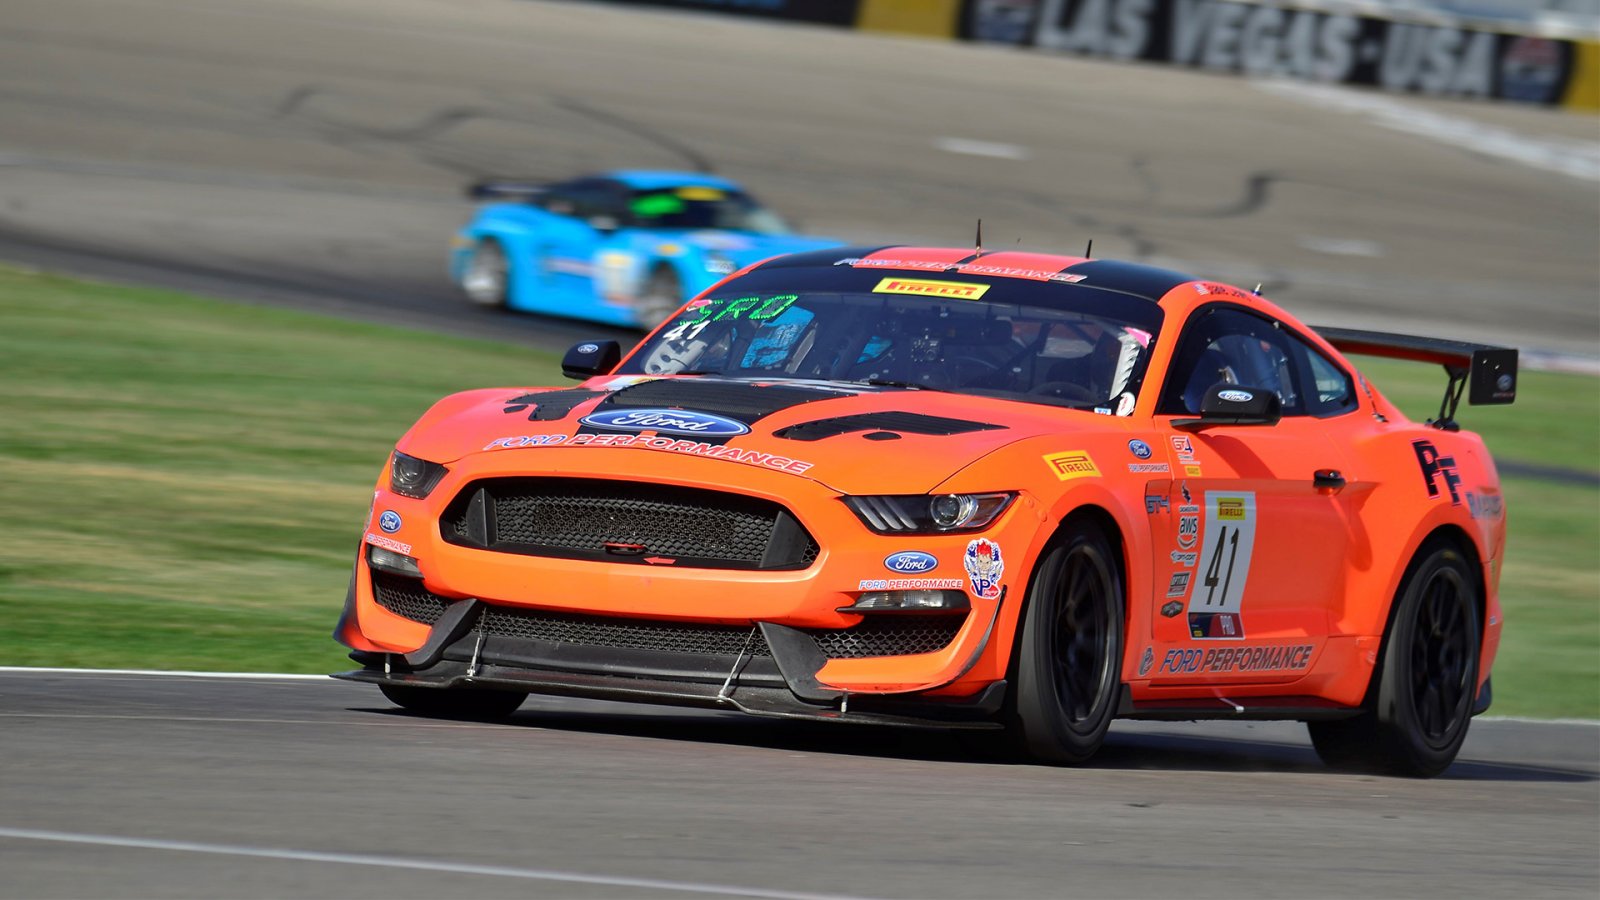 PF Racing Concludes Their SRO Season on a Positive Note in Las Vegas